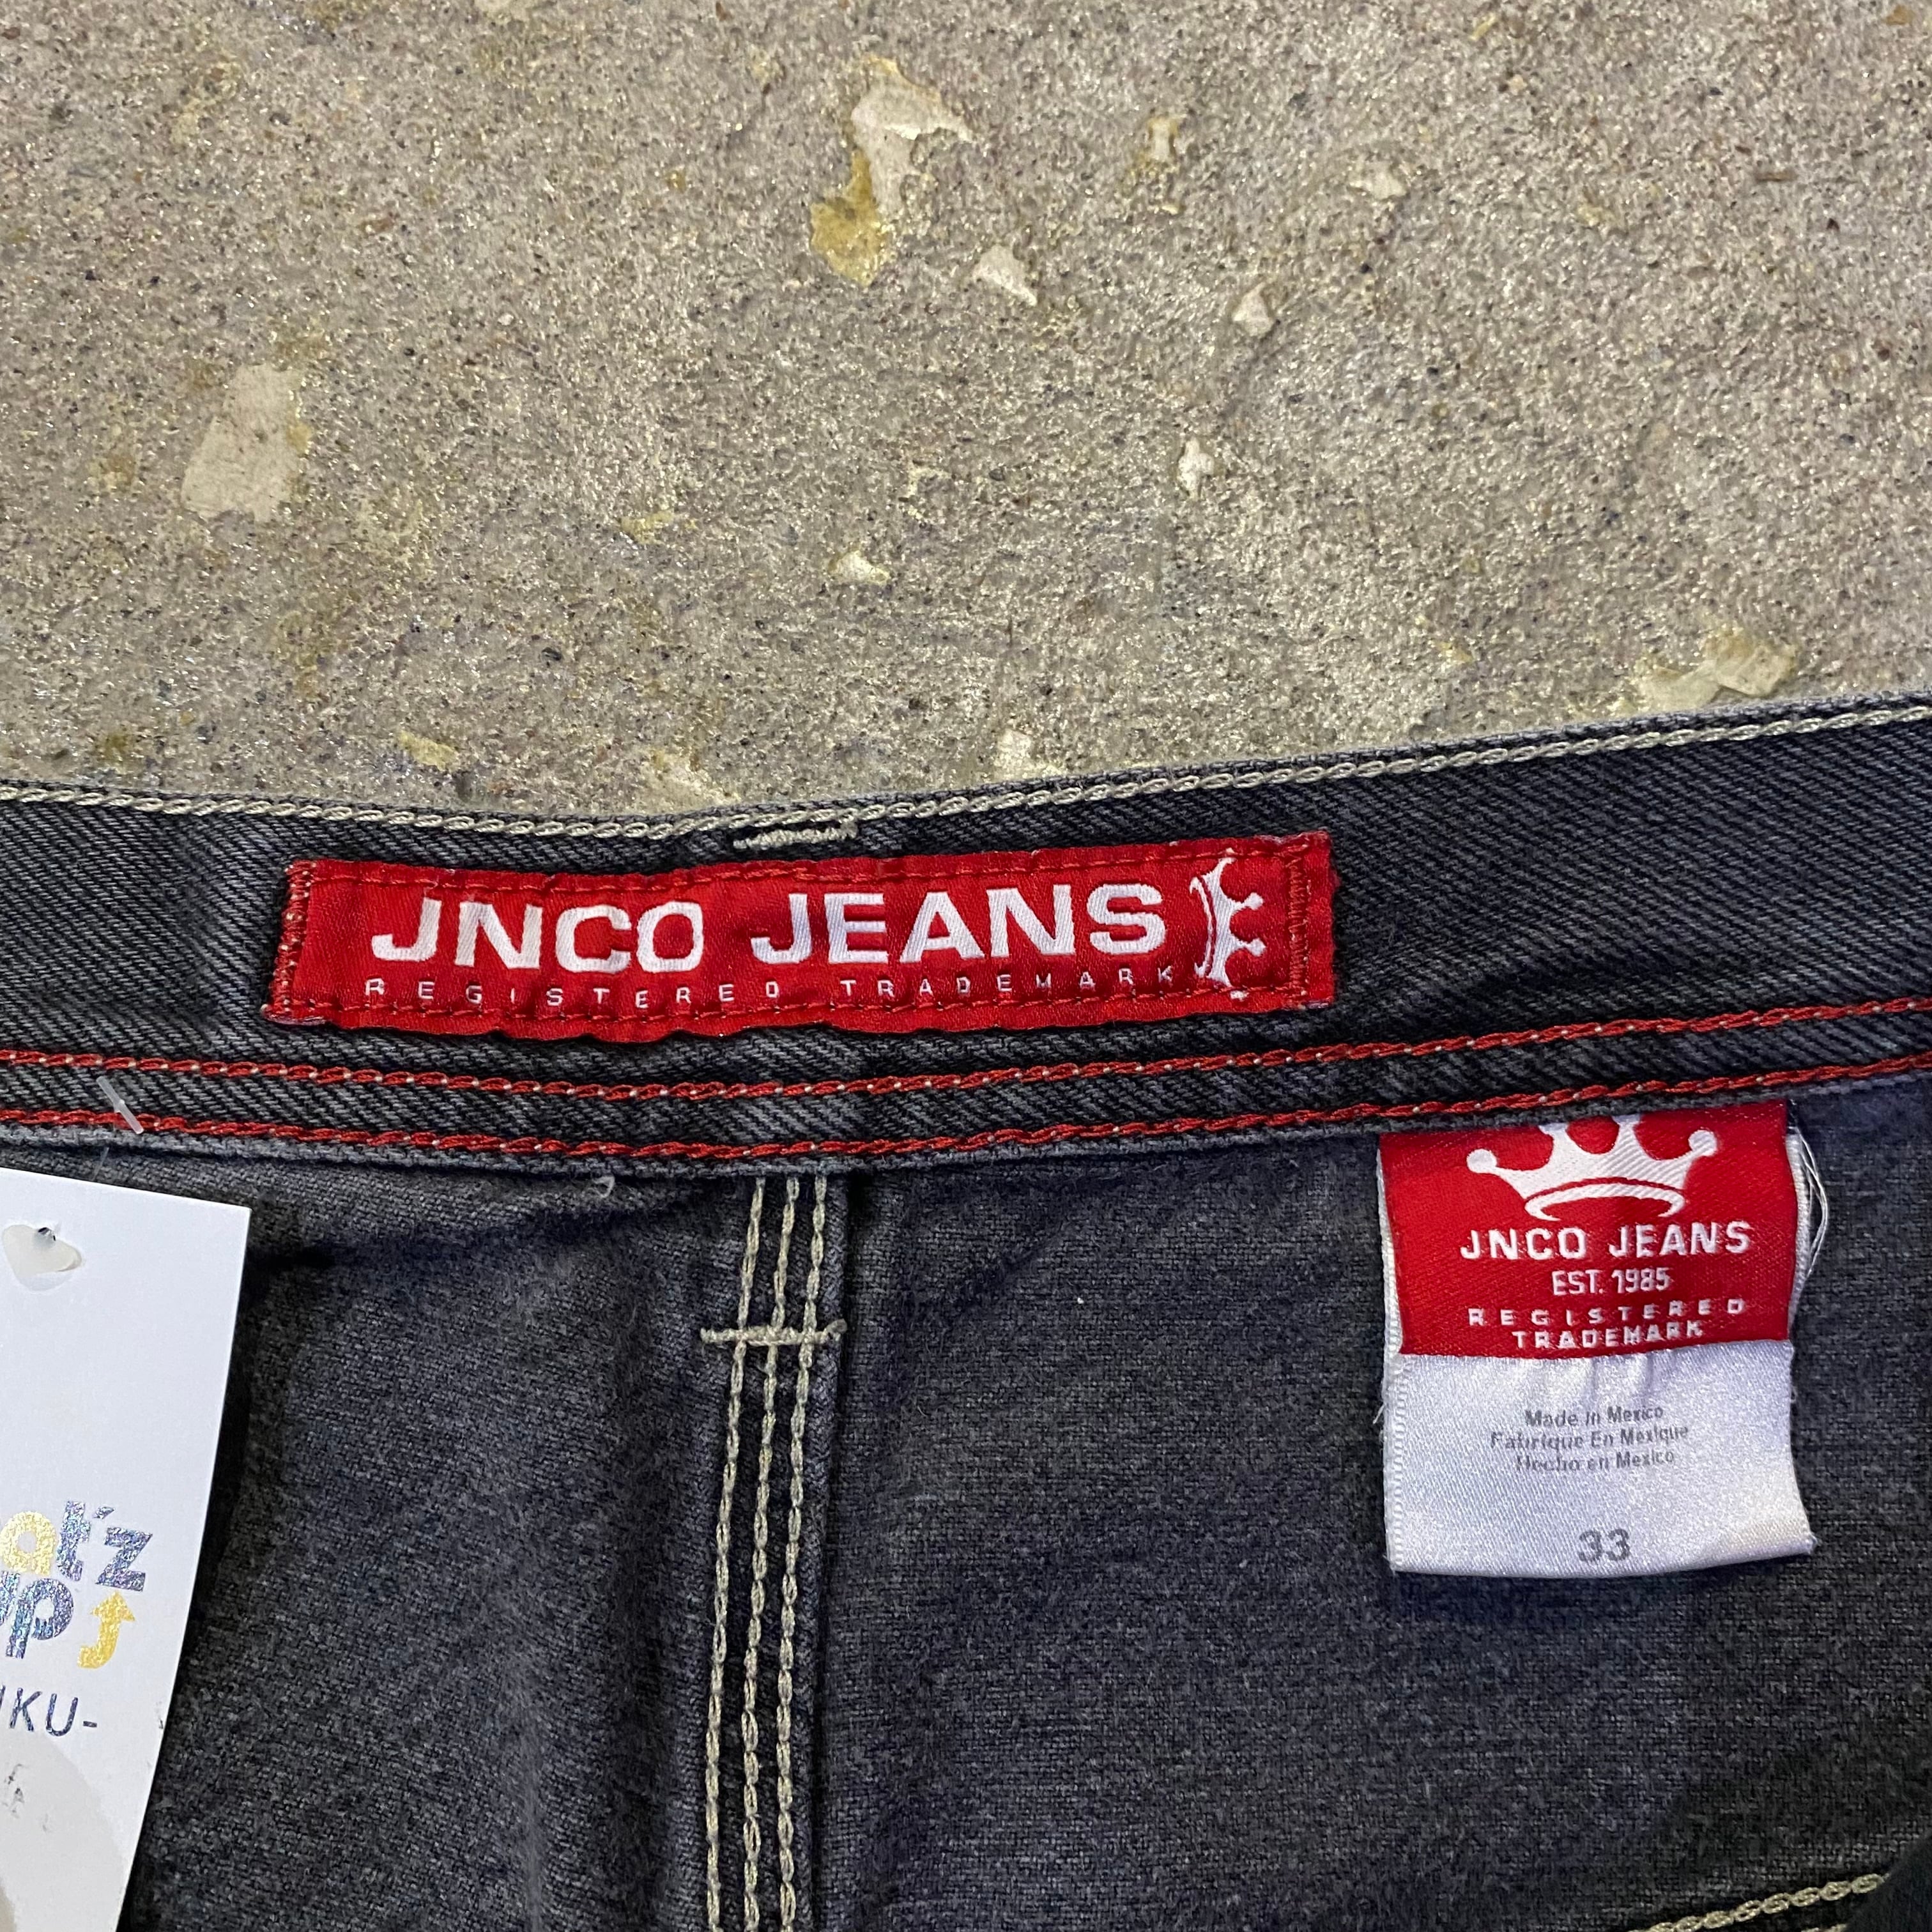 JNCO JEANS ロシア オロチ ファイアーシャツ アロハシャツ 総柄